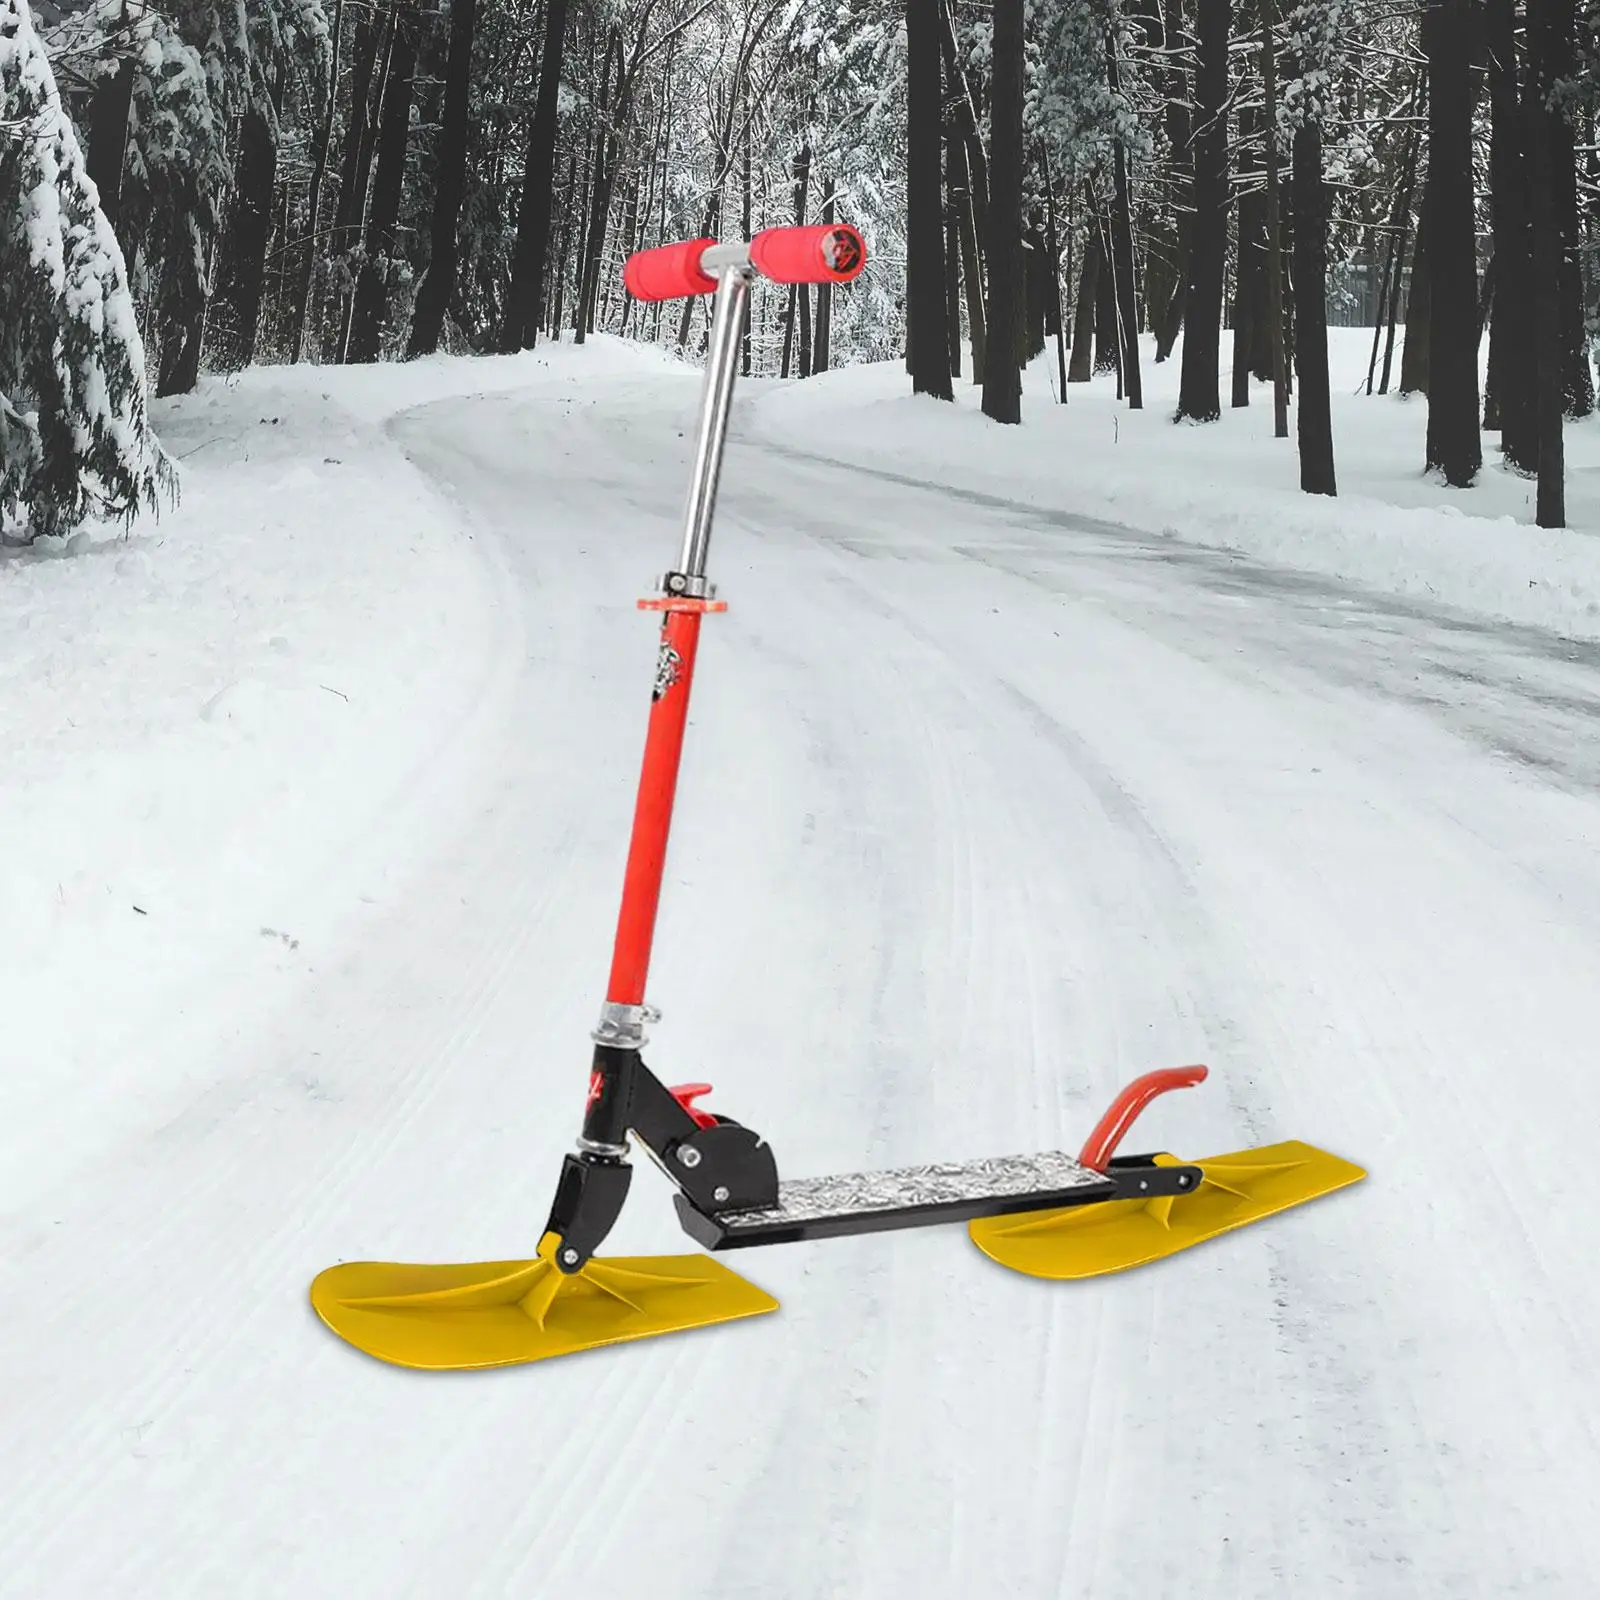 2 Pieces Snow Sled Ski Scooter Kit Durable Ski Attachment Ski Board Sleigh for Winter Skiing Game Toys Outdoor Sports Christmas